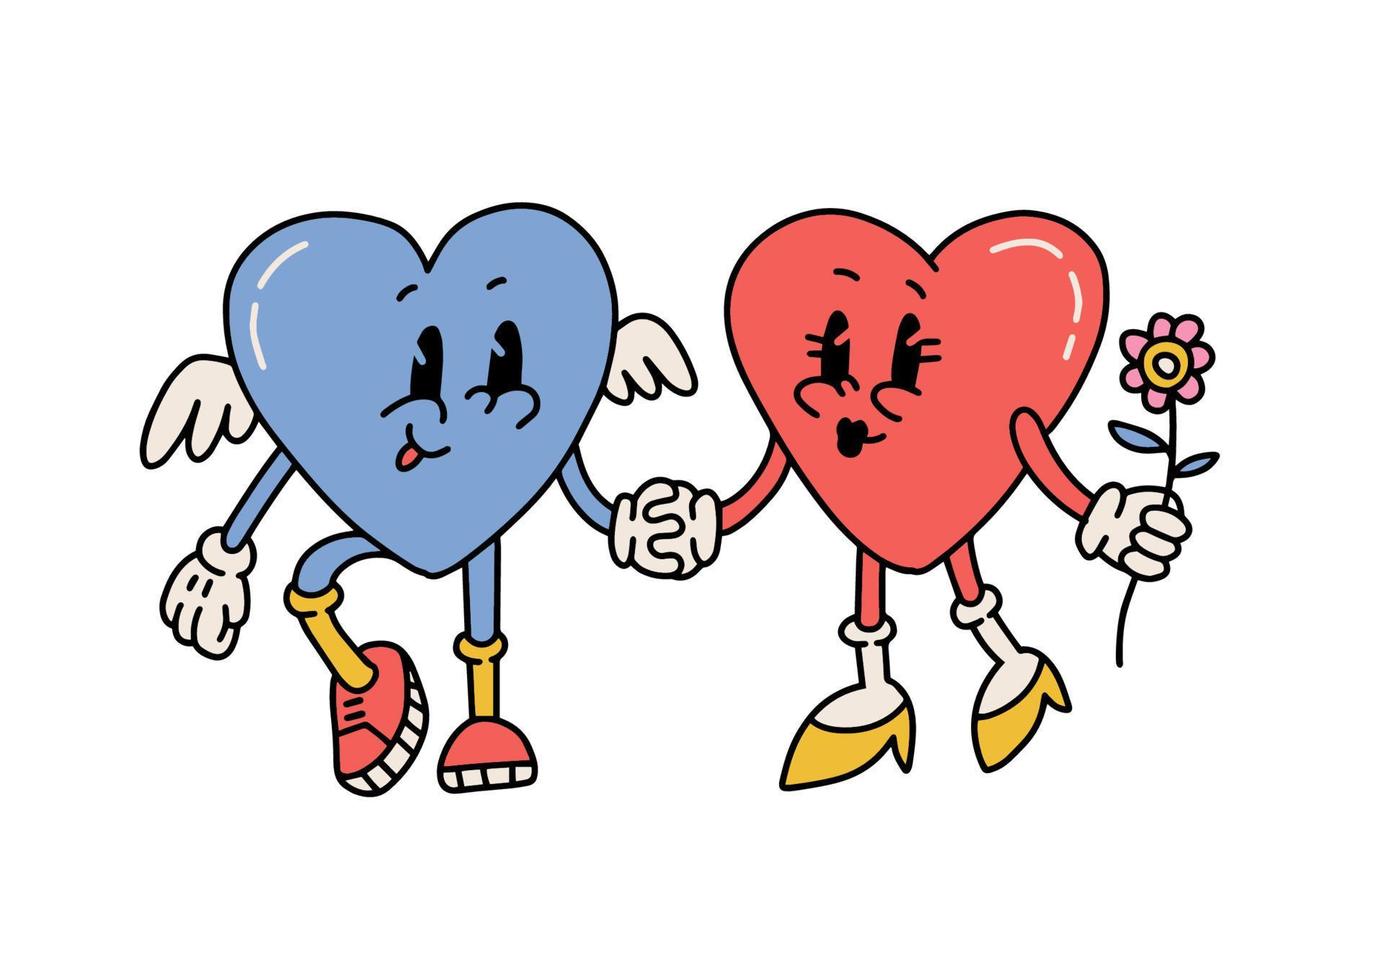 Love Hearts Couple Cartoon Characters Walk Holding Hands. Lovely mascot with wings and flower. Vector Contour Hand Drawn Illustration Isolated On White Background